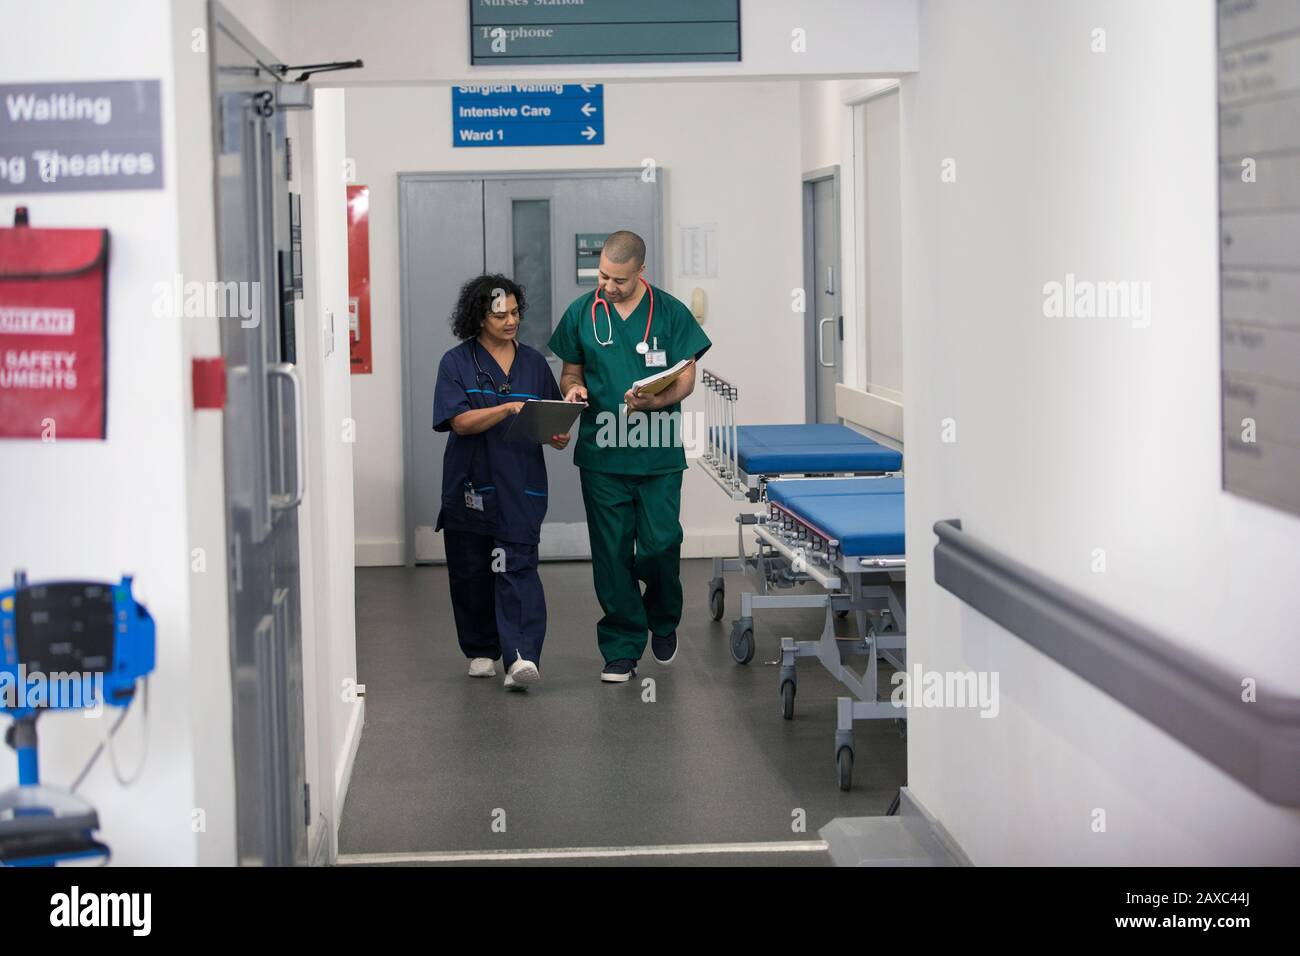 Doctor and surgeon discussing medical chart, walking in hospital corridor Stock Photo